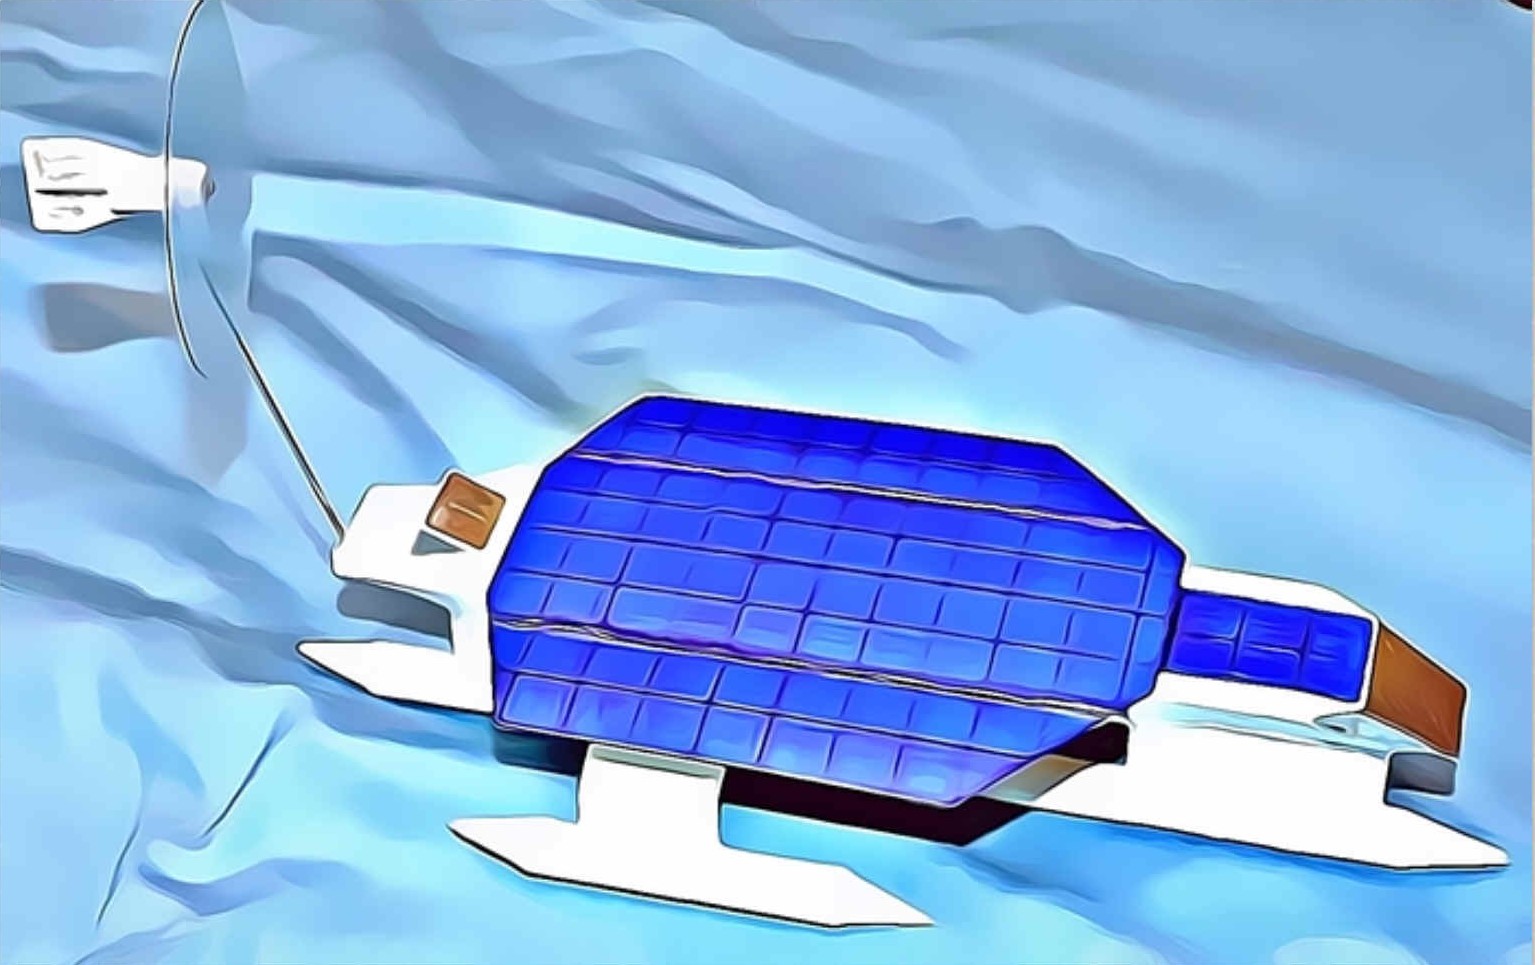 Sleeker design for faster transits, using solar and wind power